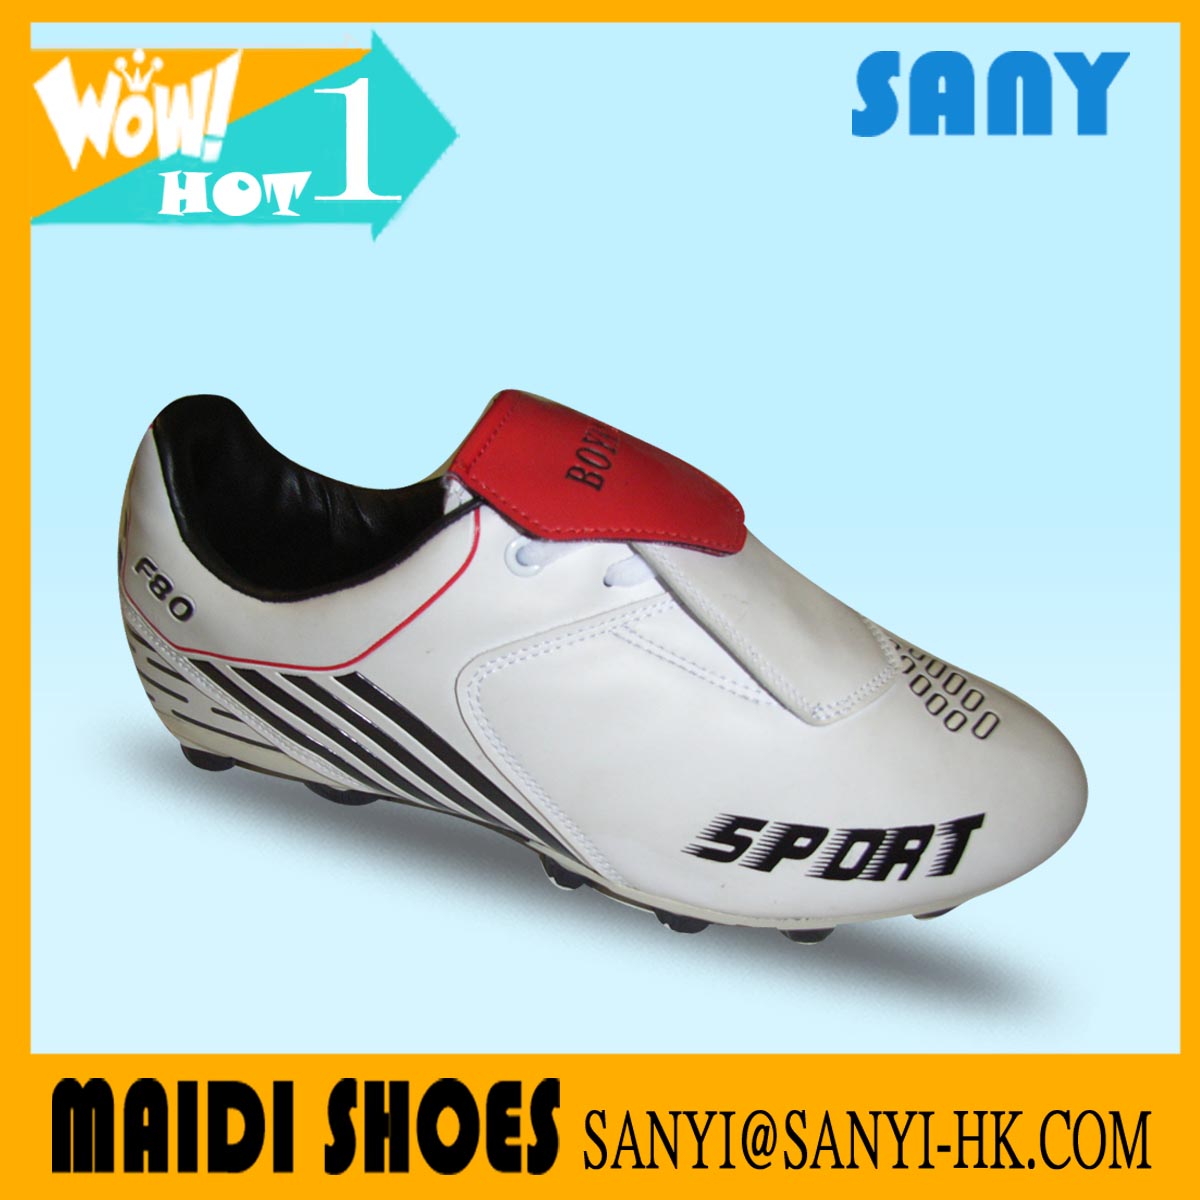 New Designed Durable and Anti-skid Fashionable Football Shoes with Soft PU Lining